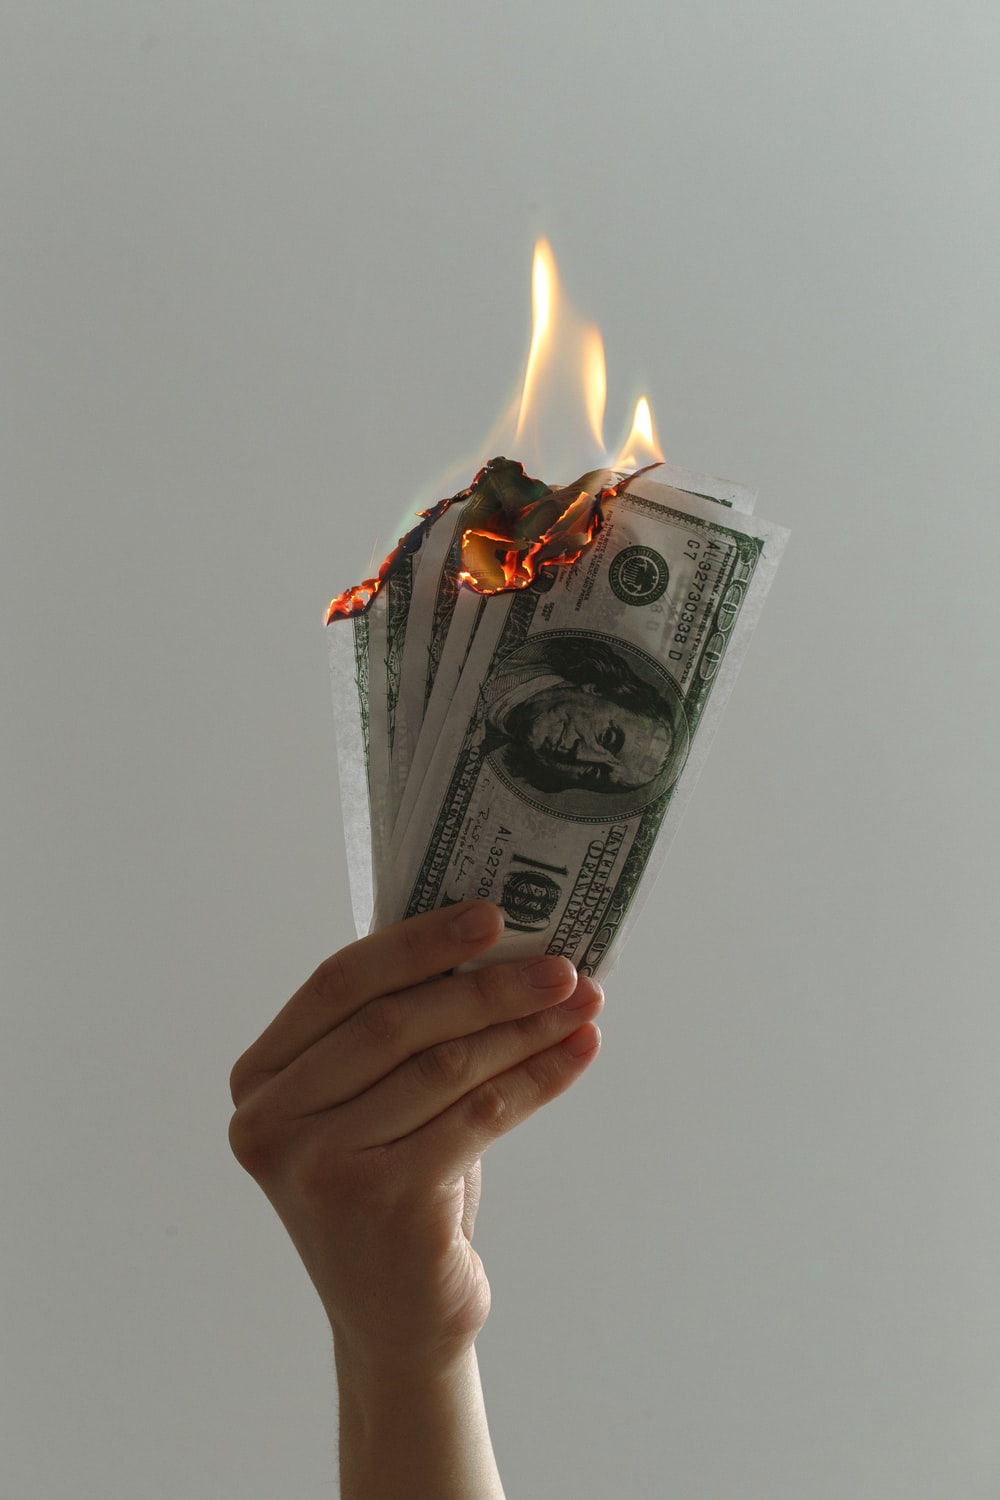 Burning Money Picture. Download Free Image